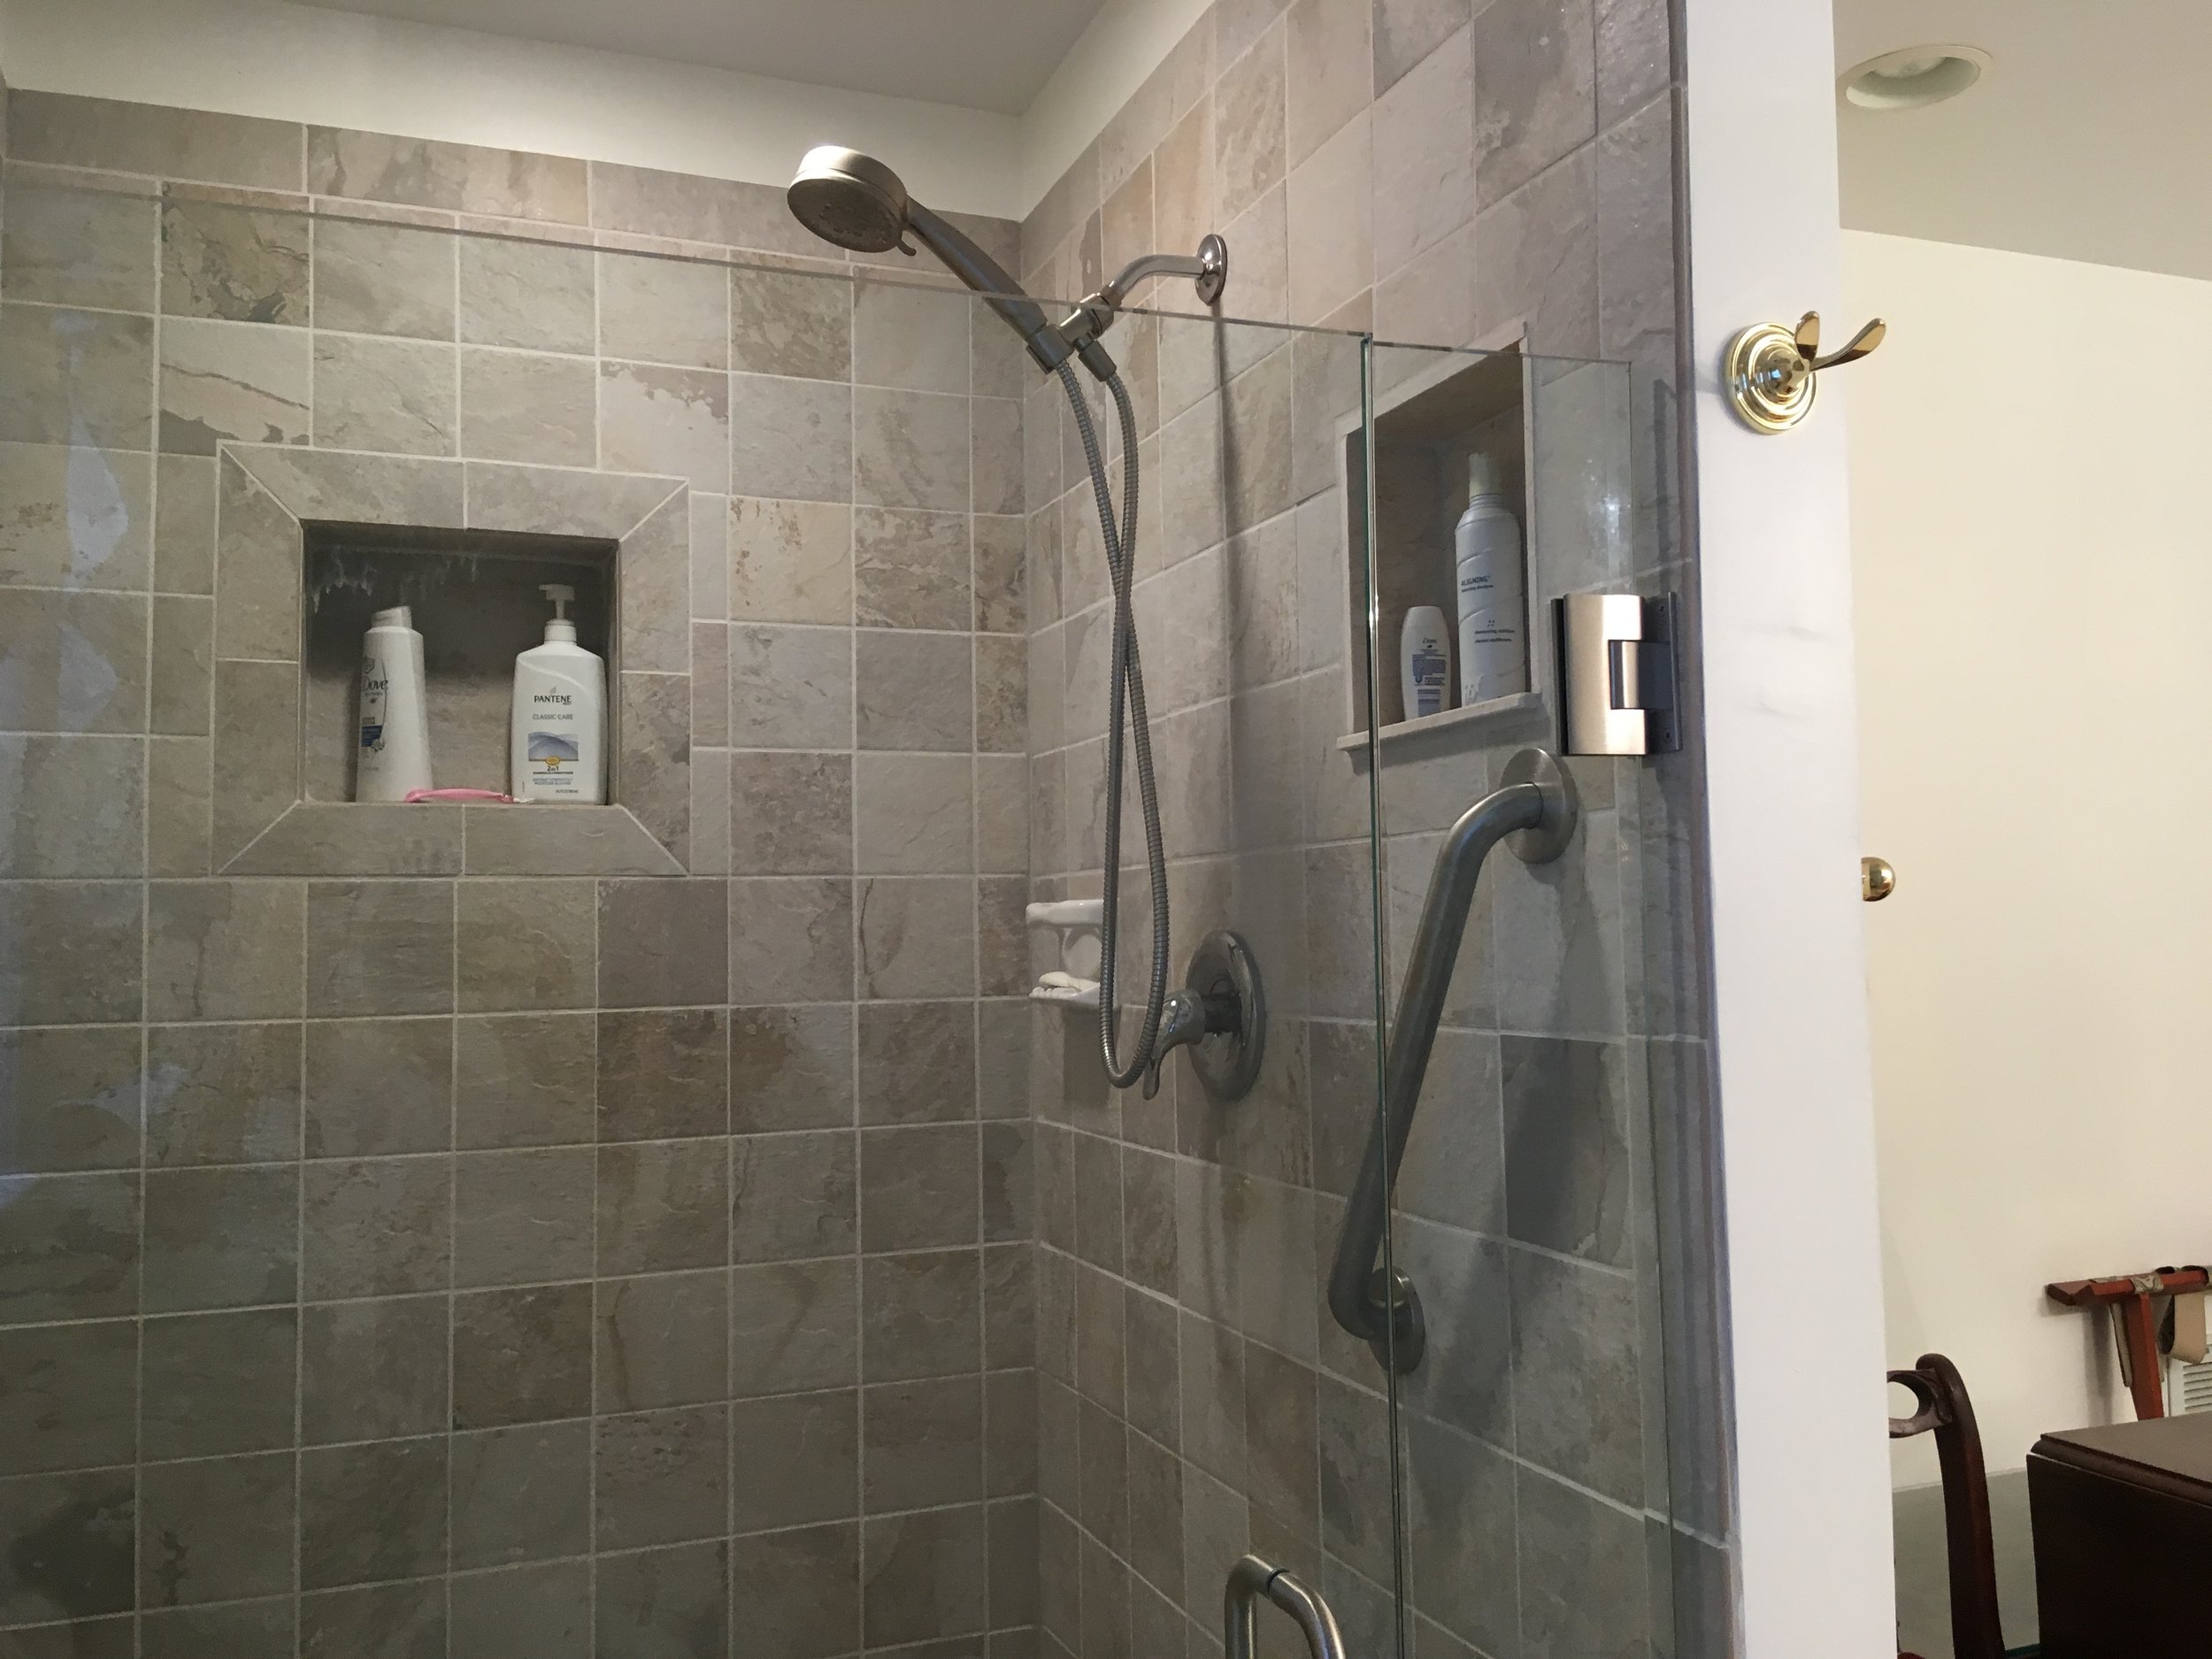  New tiled bathroom complete with Rain-X coating for glass doors, two niches, all new shower plumbing fixtures and tiles. 